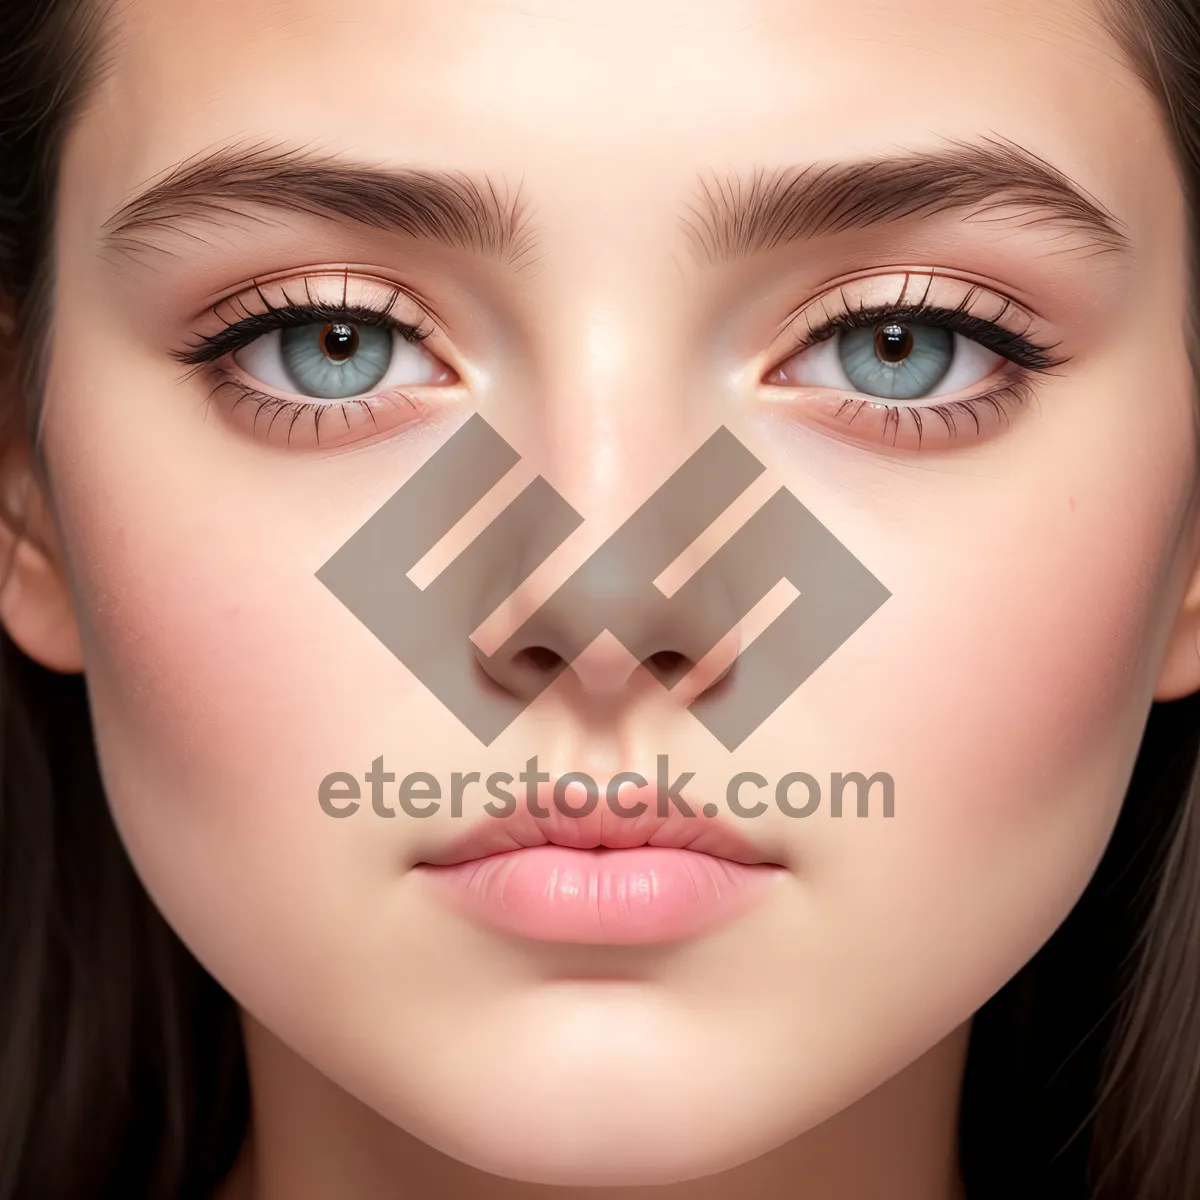 Picture of Stunning Close-Up of Attractive Model's Beautifully Enhanced Eyebrows